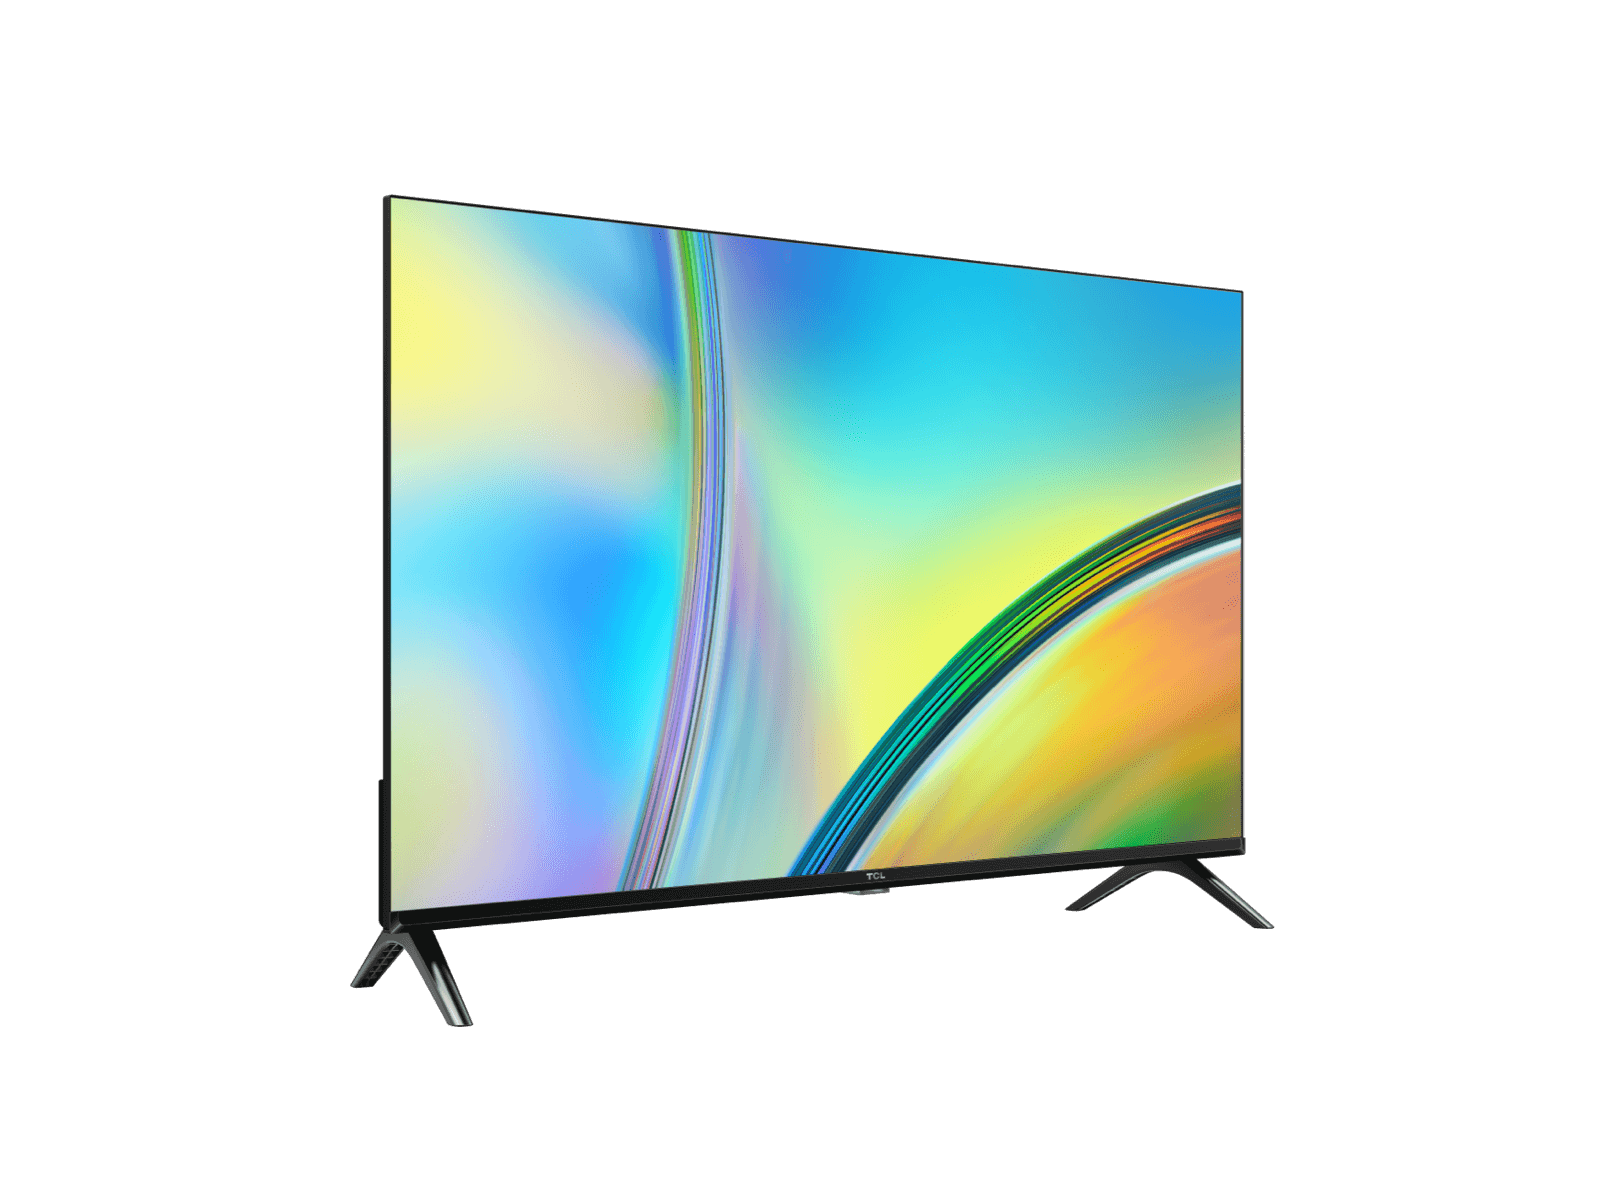 Frameless Full HD HDR TV with Android TV -32 inch TV - S5400AF - TCL Europe